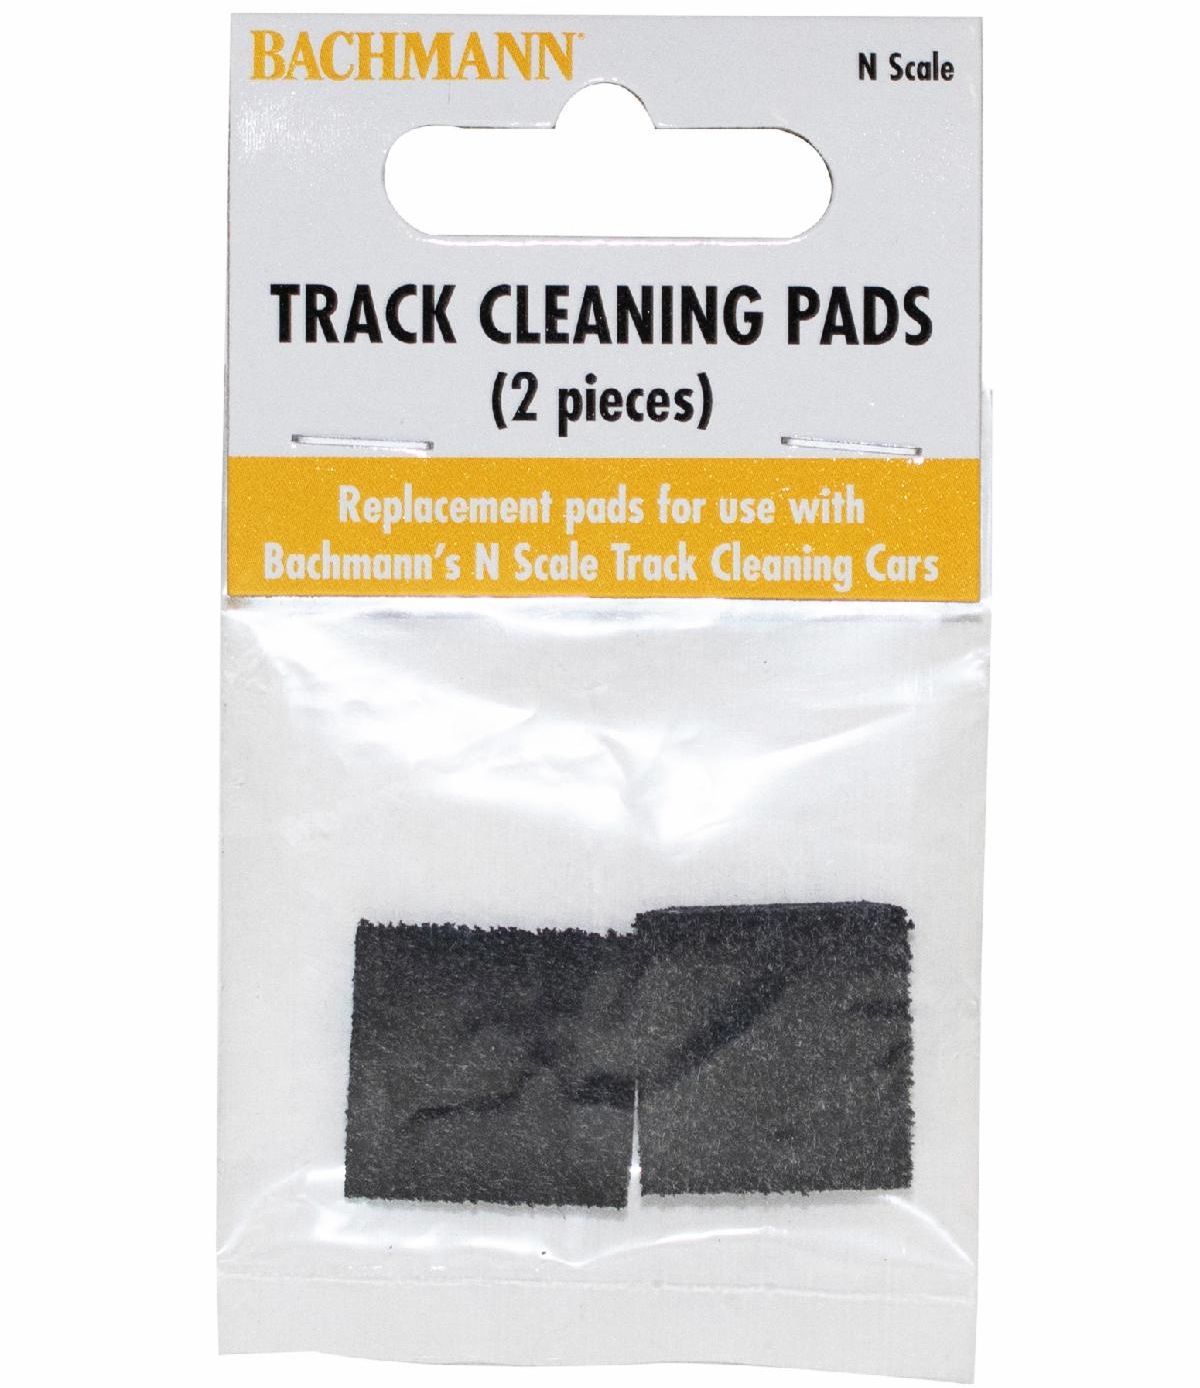 N Scale - Bachmann - 16999 - Track Cleaning Car Replacement Pads - Track, N Scale